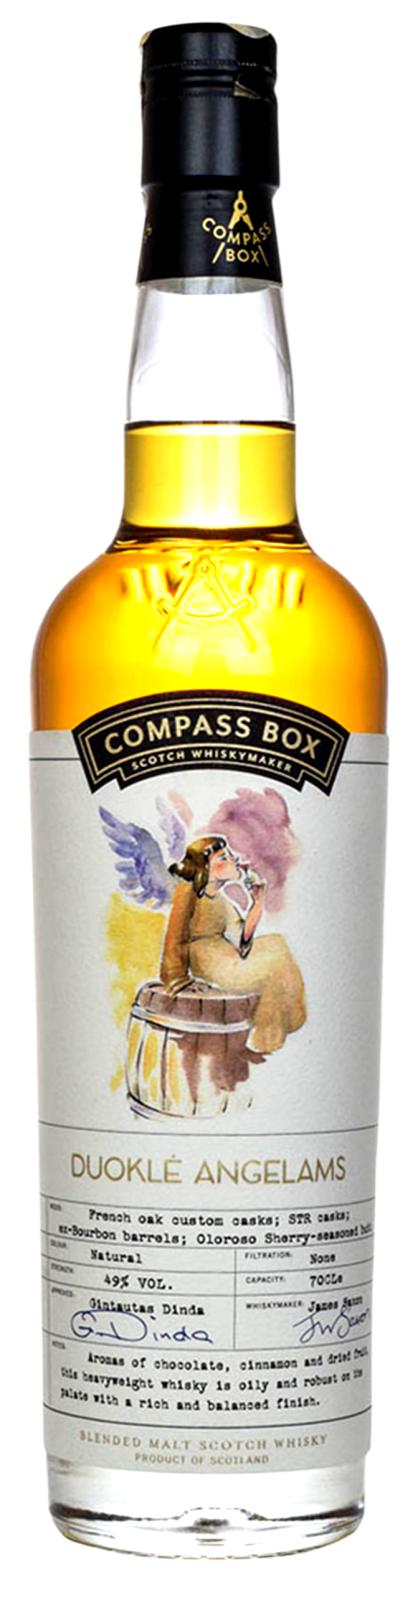 Compass Box Duokle Angelams Blended Scotch Whisky | 700ML